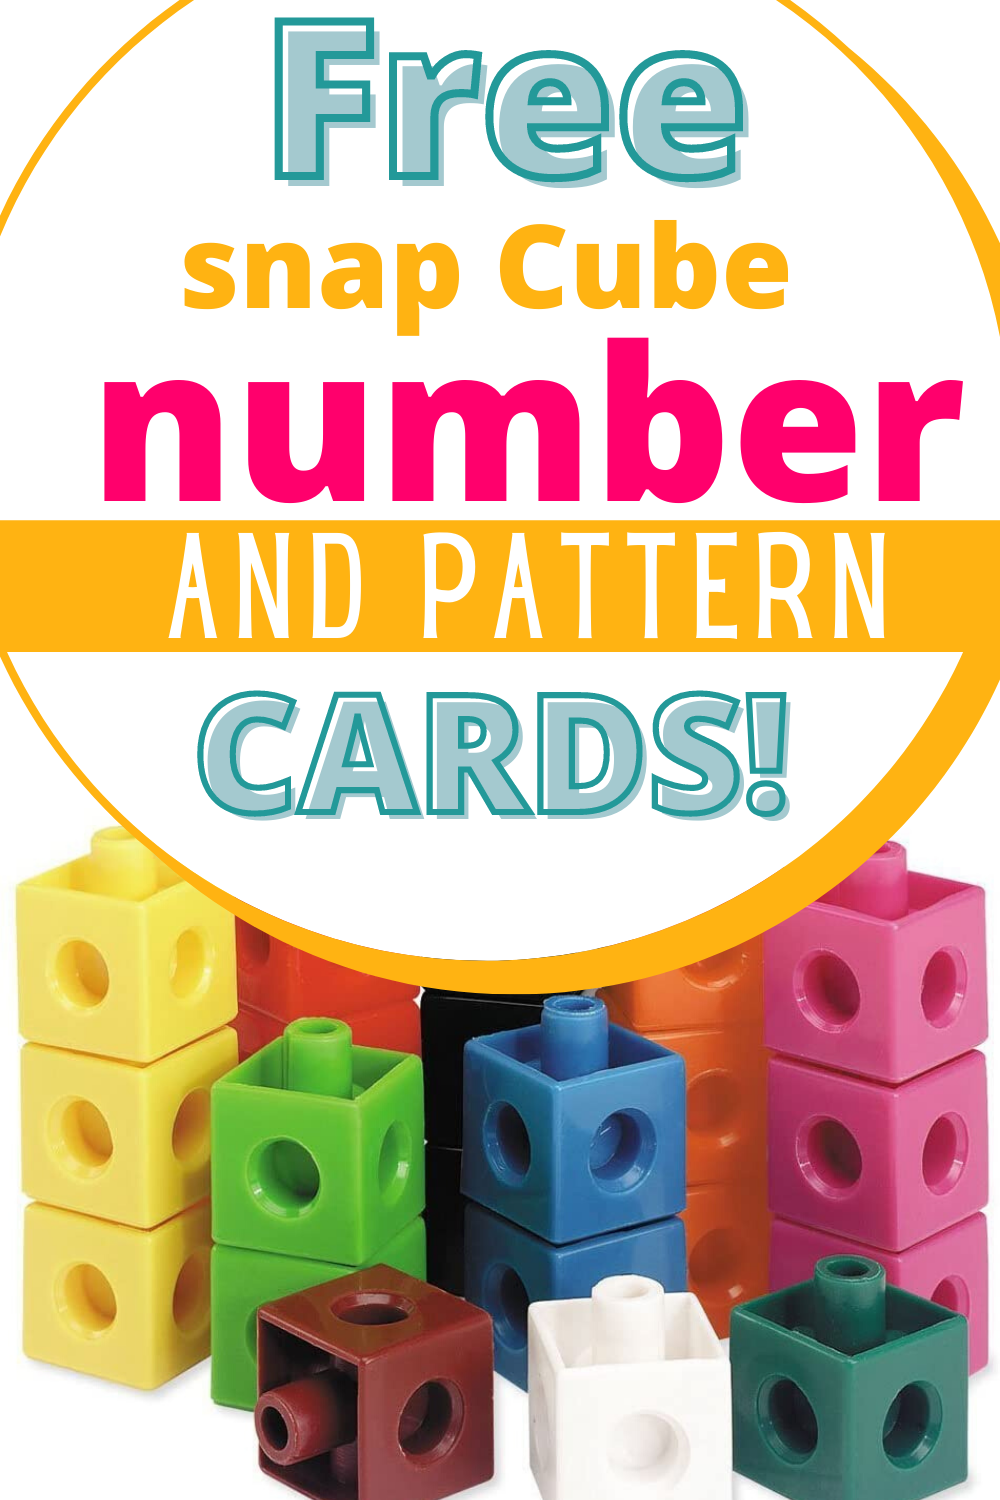 snap-cubes-number-and-pattern-cards-one-beautiful-home